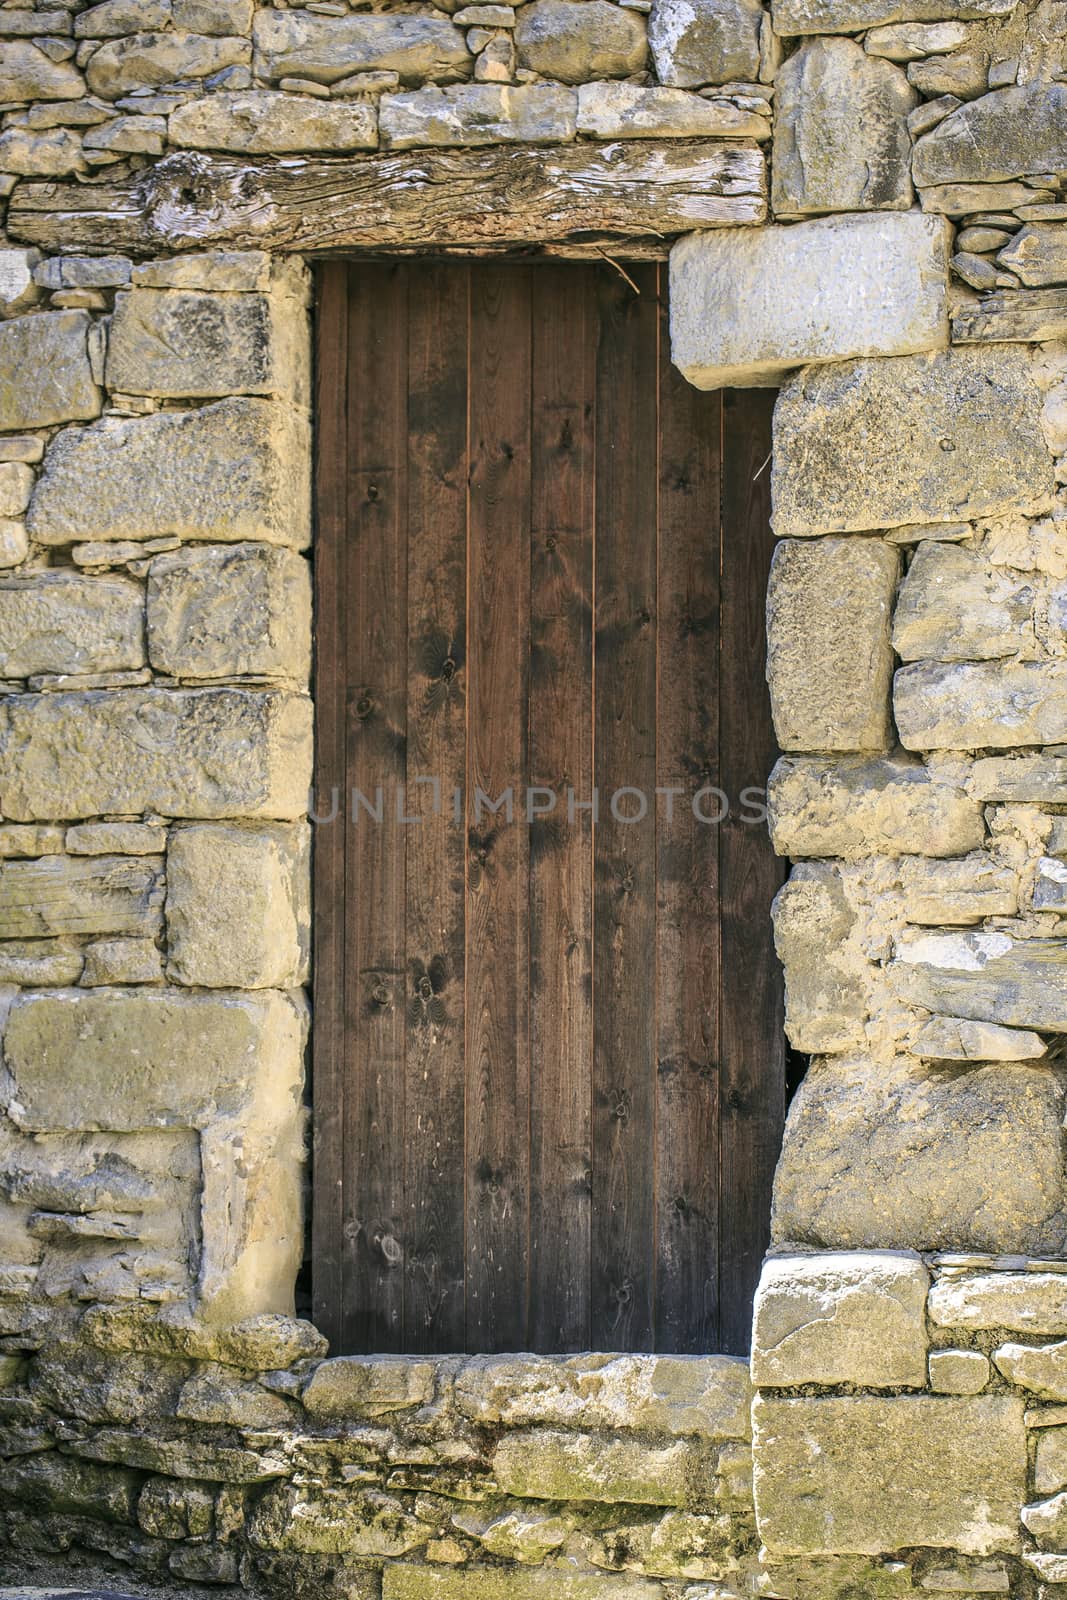 Vintage old wooden door in a Town of spain by nachrc2001